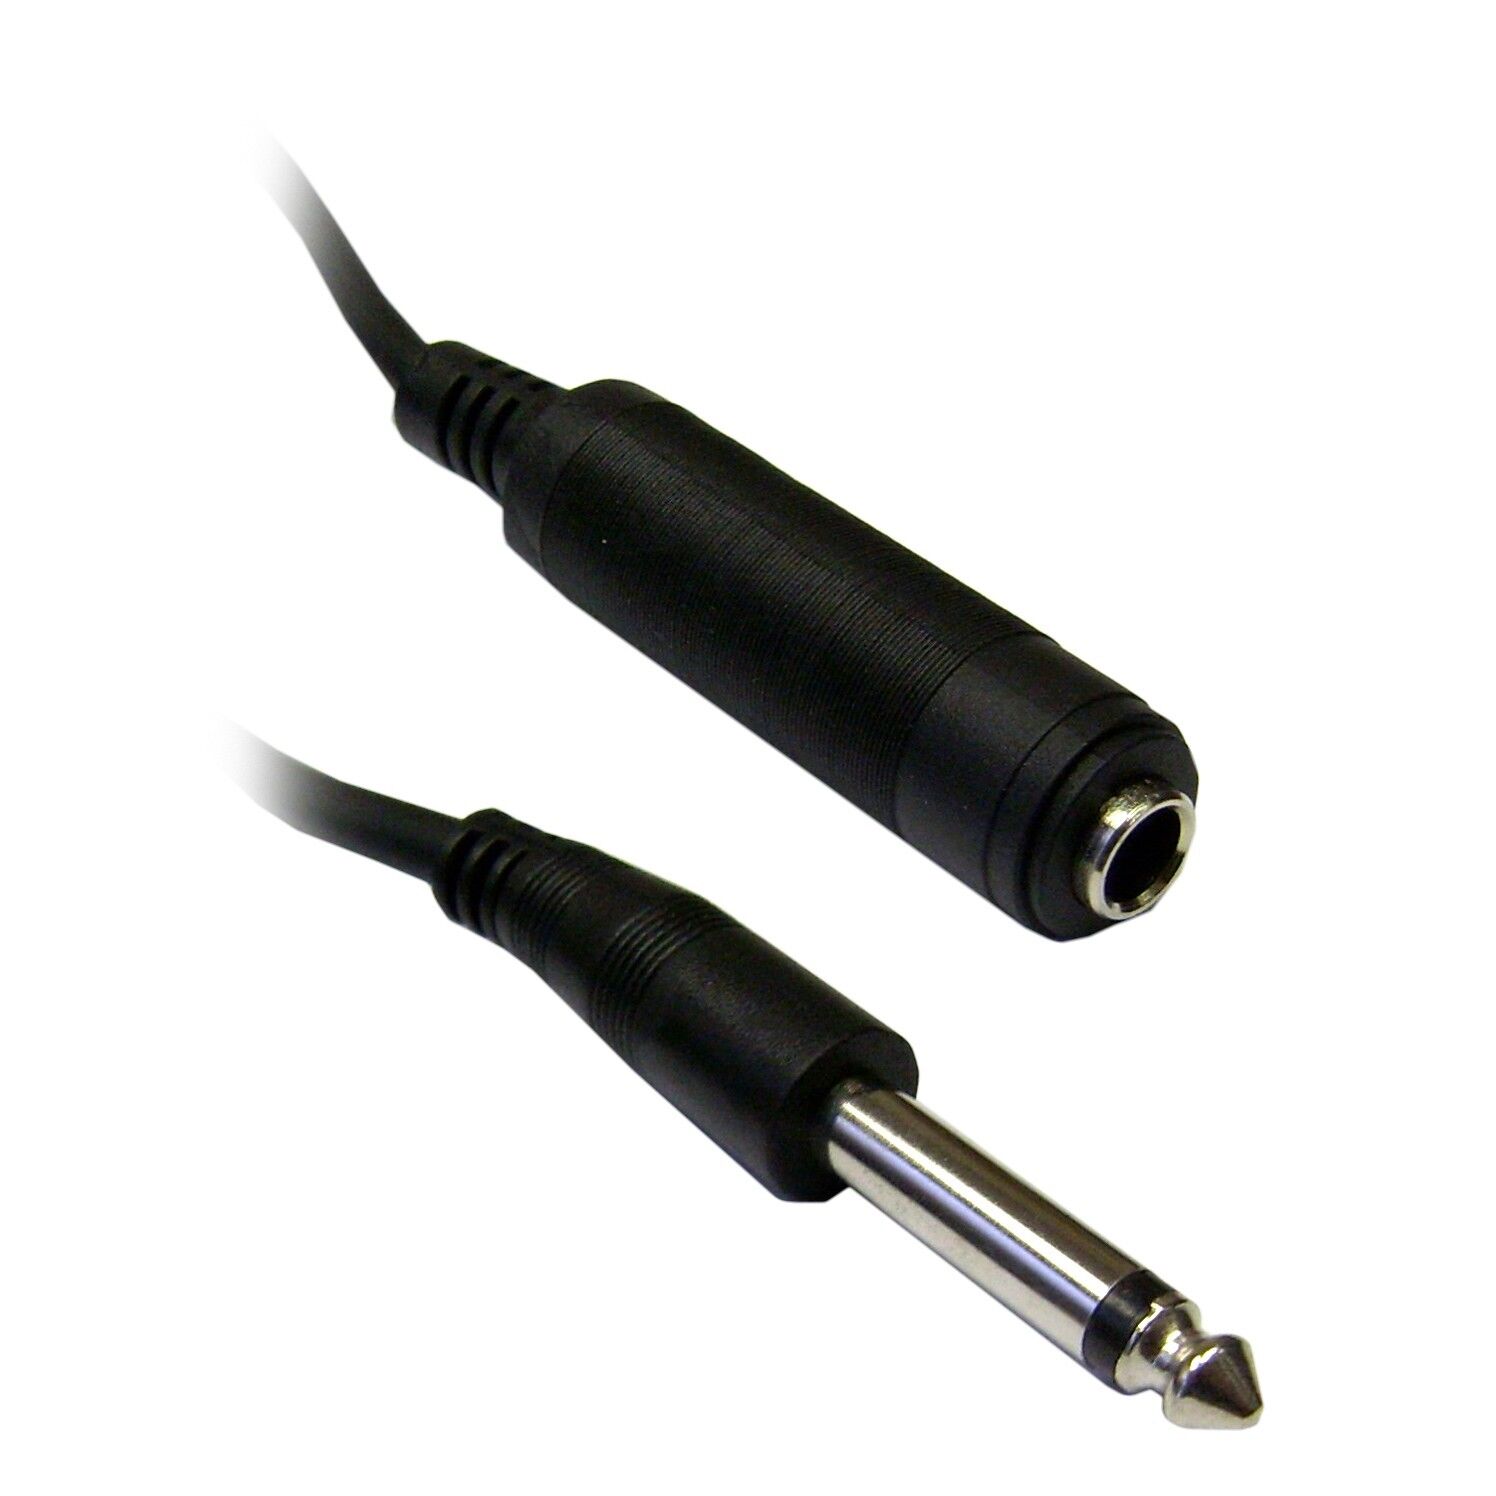 6ft 1/4 inch Mono Extension Cable, 1/4 Male to 1/4 Female, 6 foot WC-10A1-61206